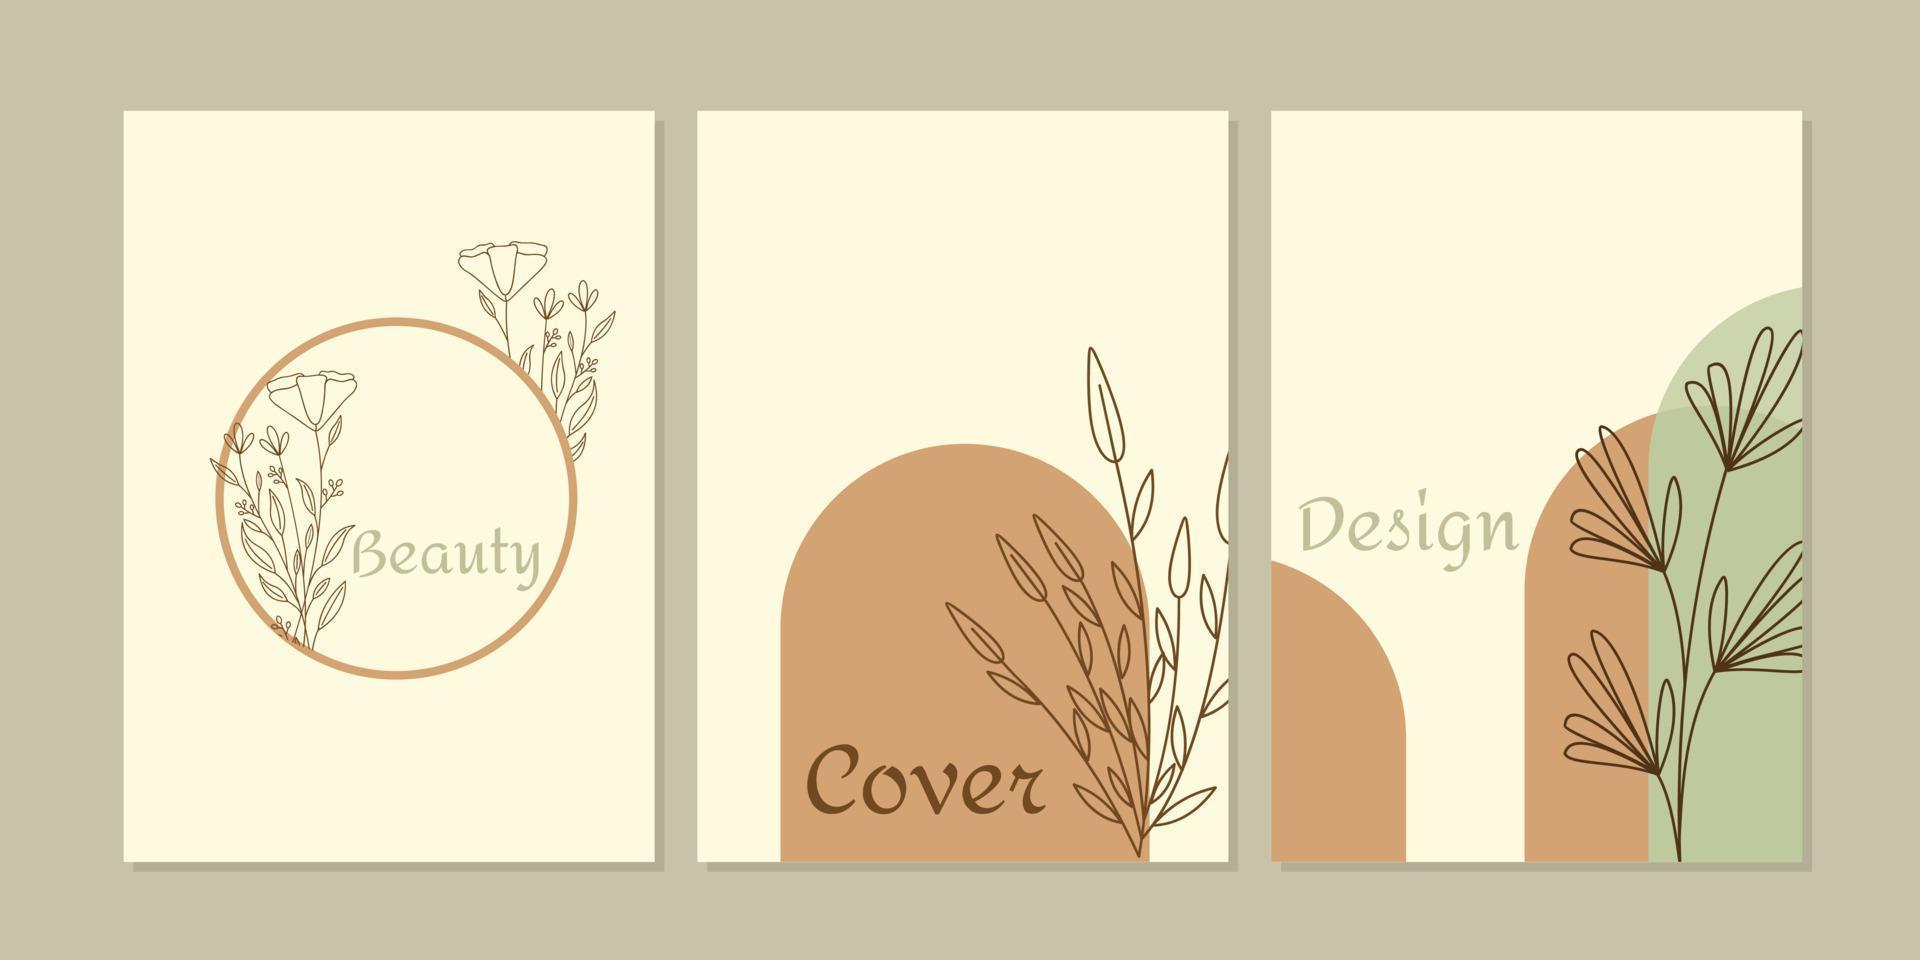 set of book cover designs with hand drawn floral decorations. abstract floral background. size A4 For notebooks, planners, brochures, books, catalogs vector